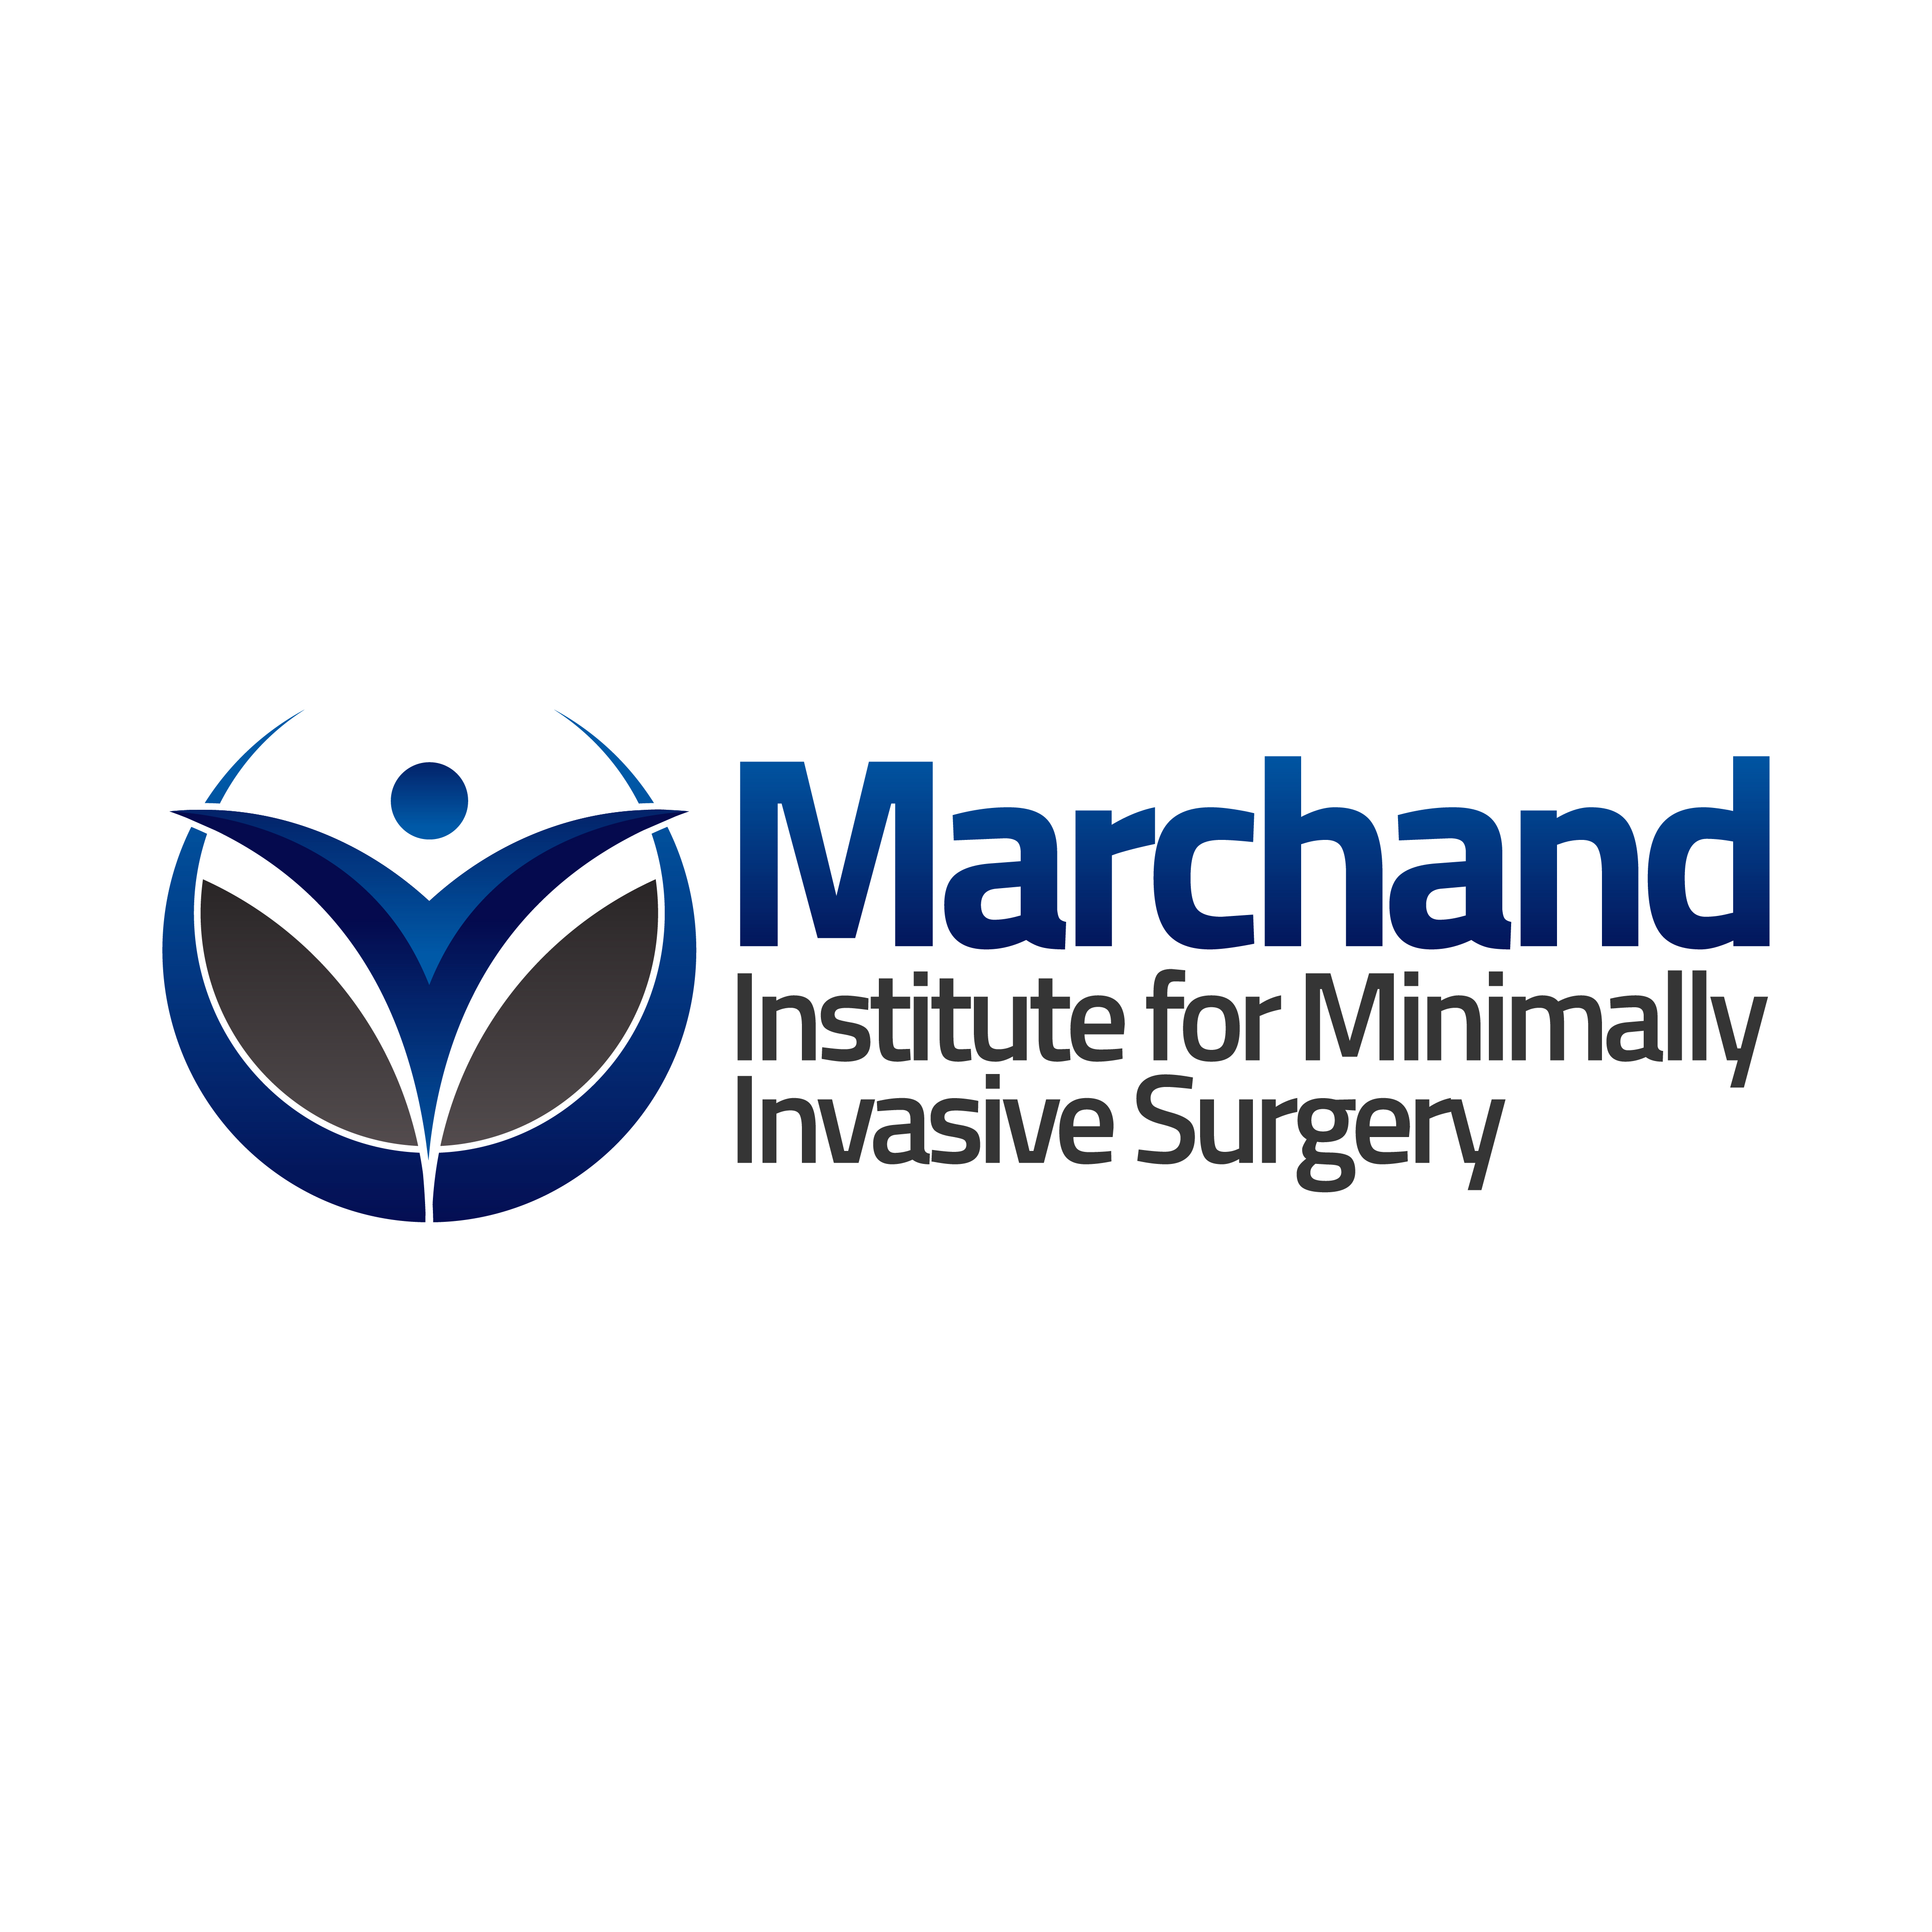 Marchand Institute for Minimally Invasive Surgery Logo